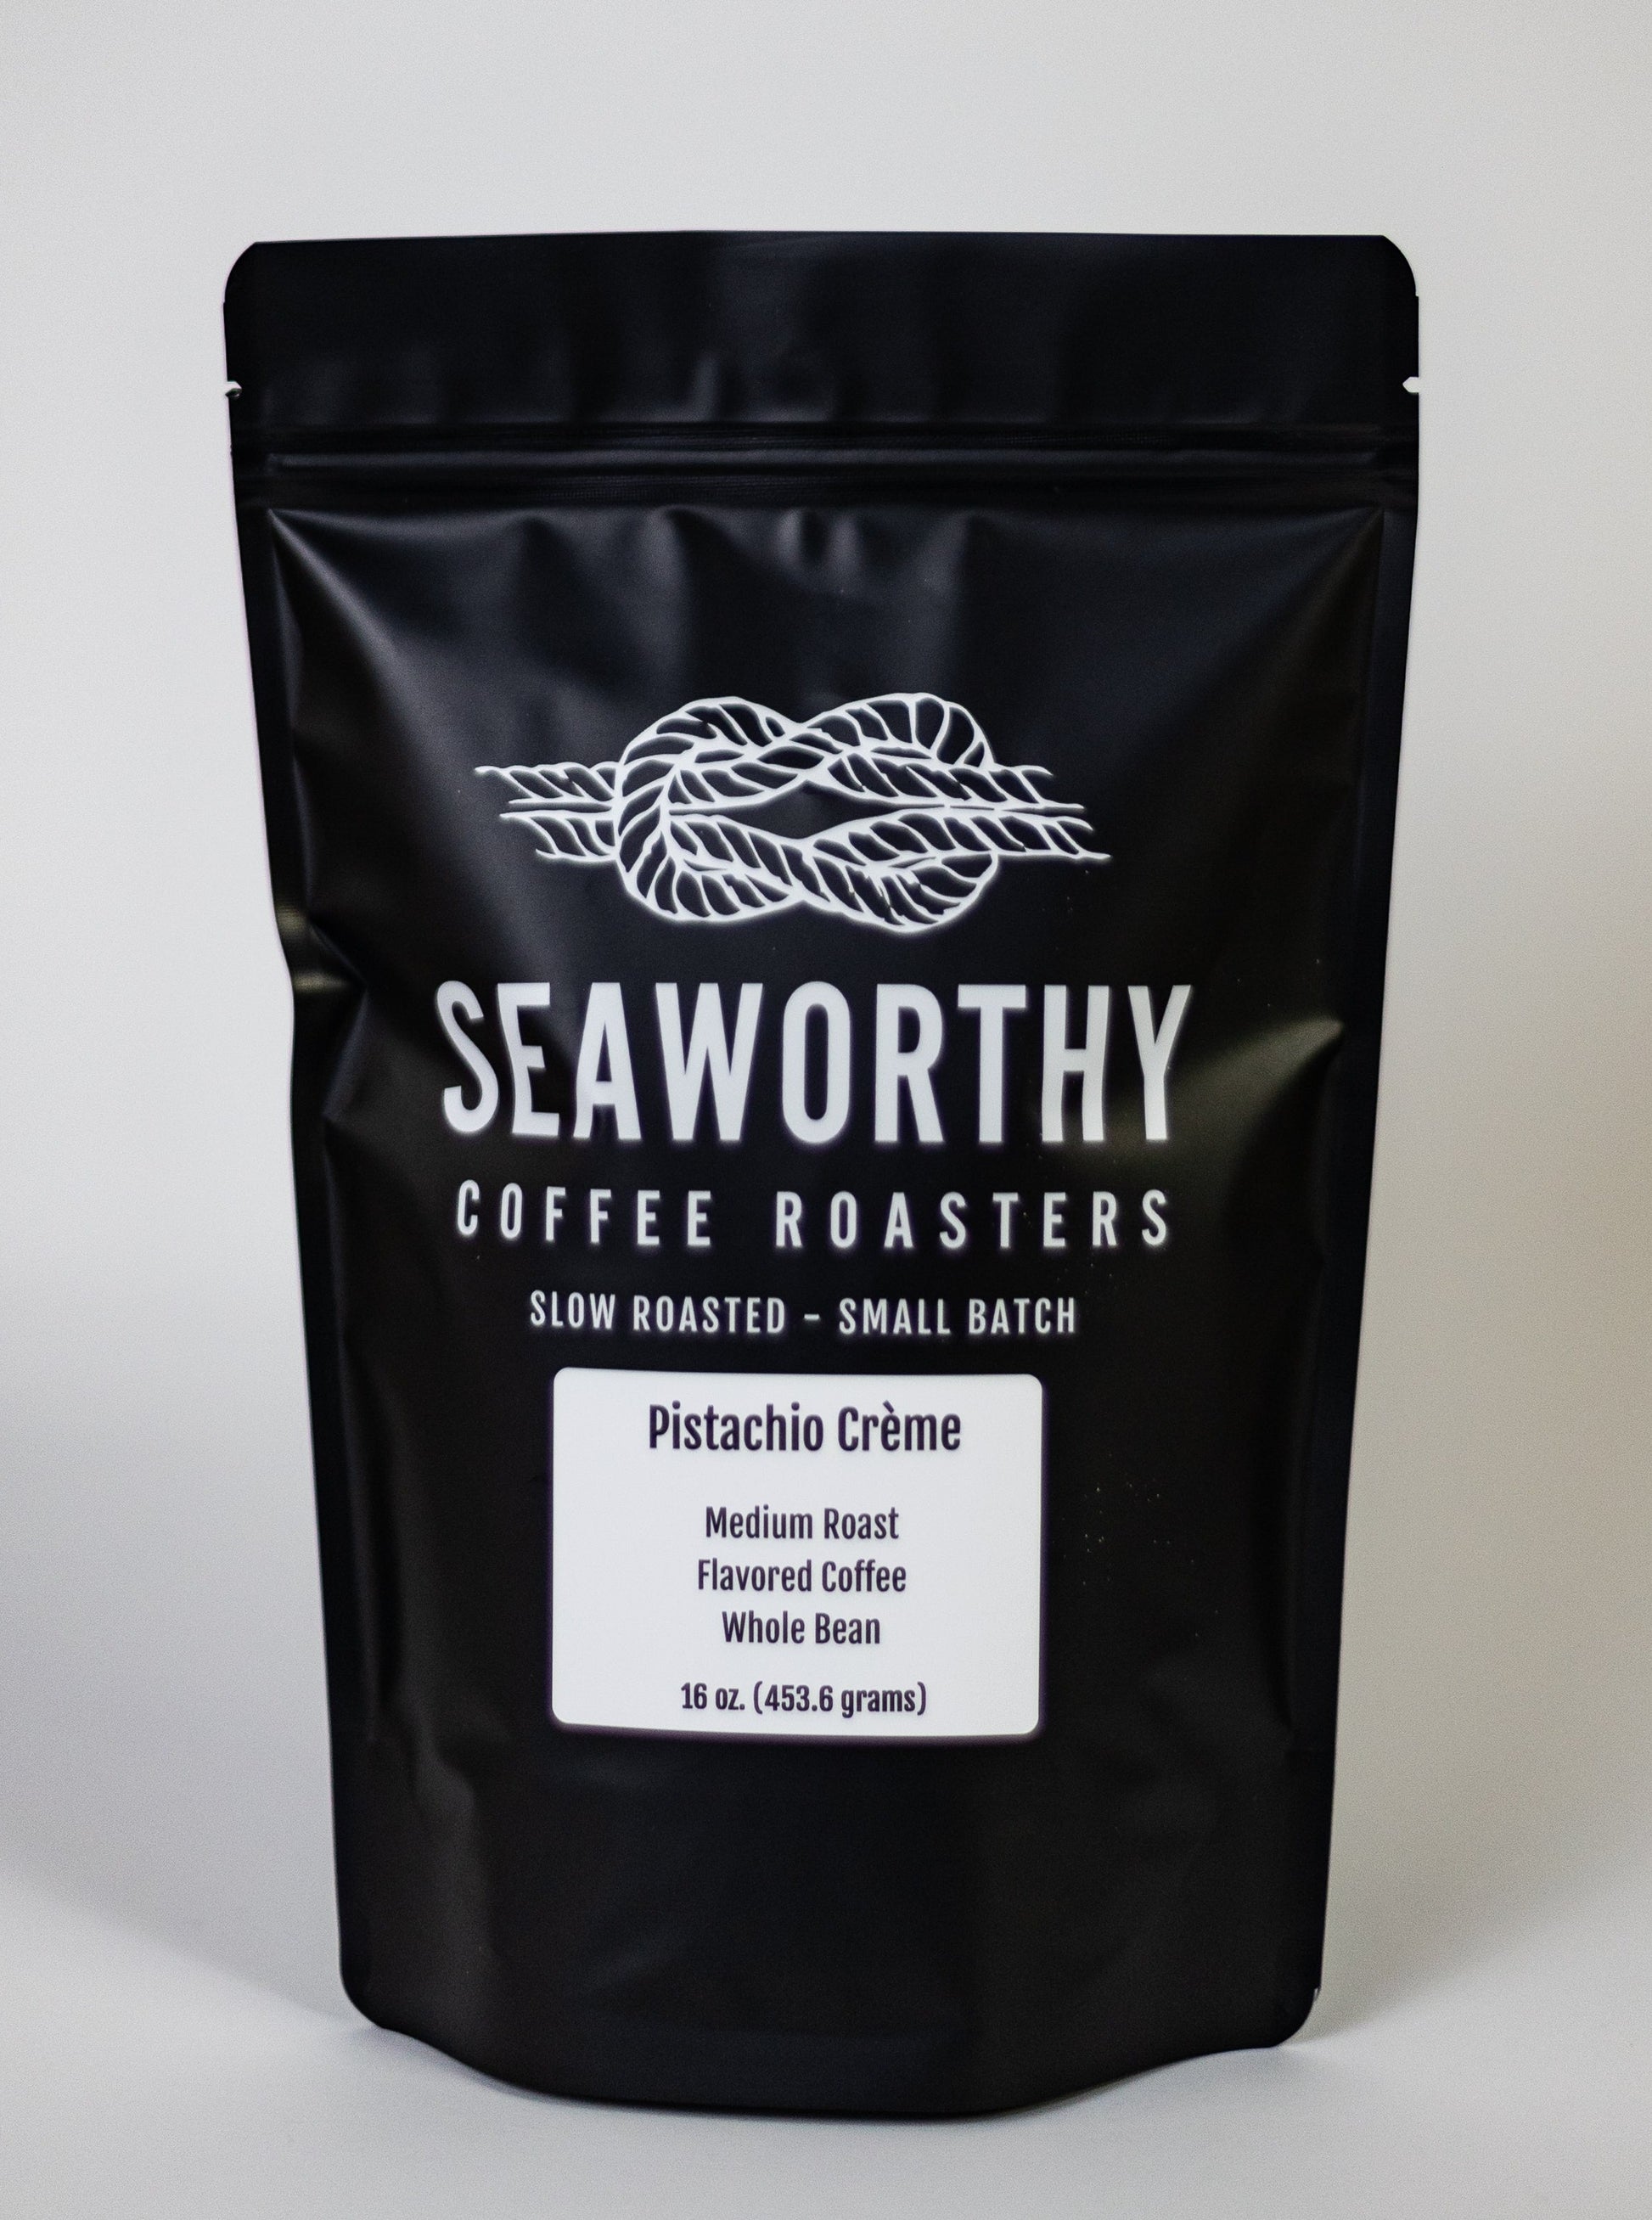 Seaworthy slow roasted, small batch, low acid coffee. 1 pound bag of Pistachio Creme flavored coffee.